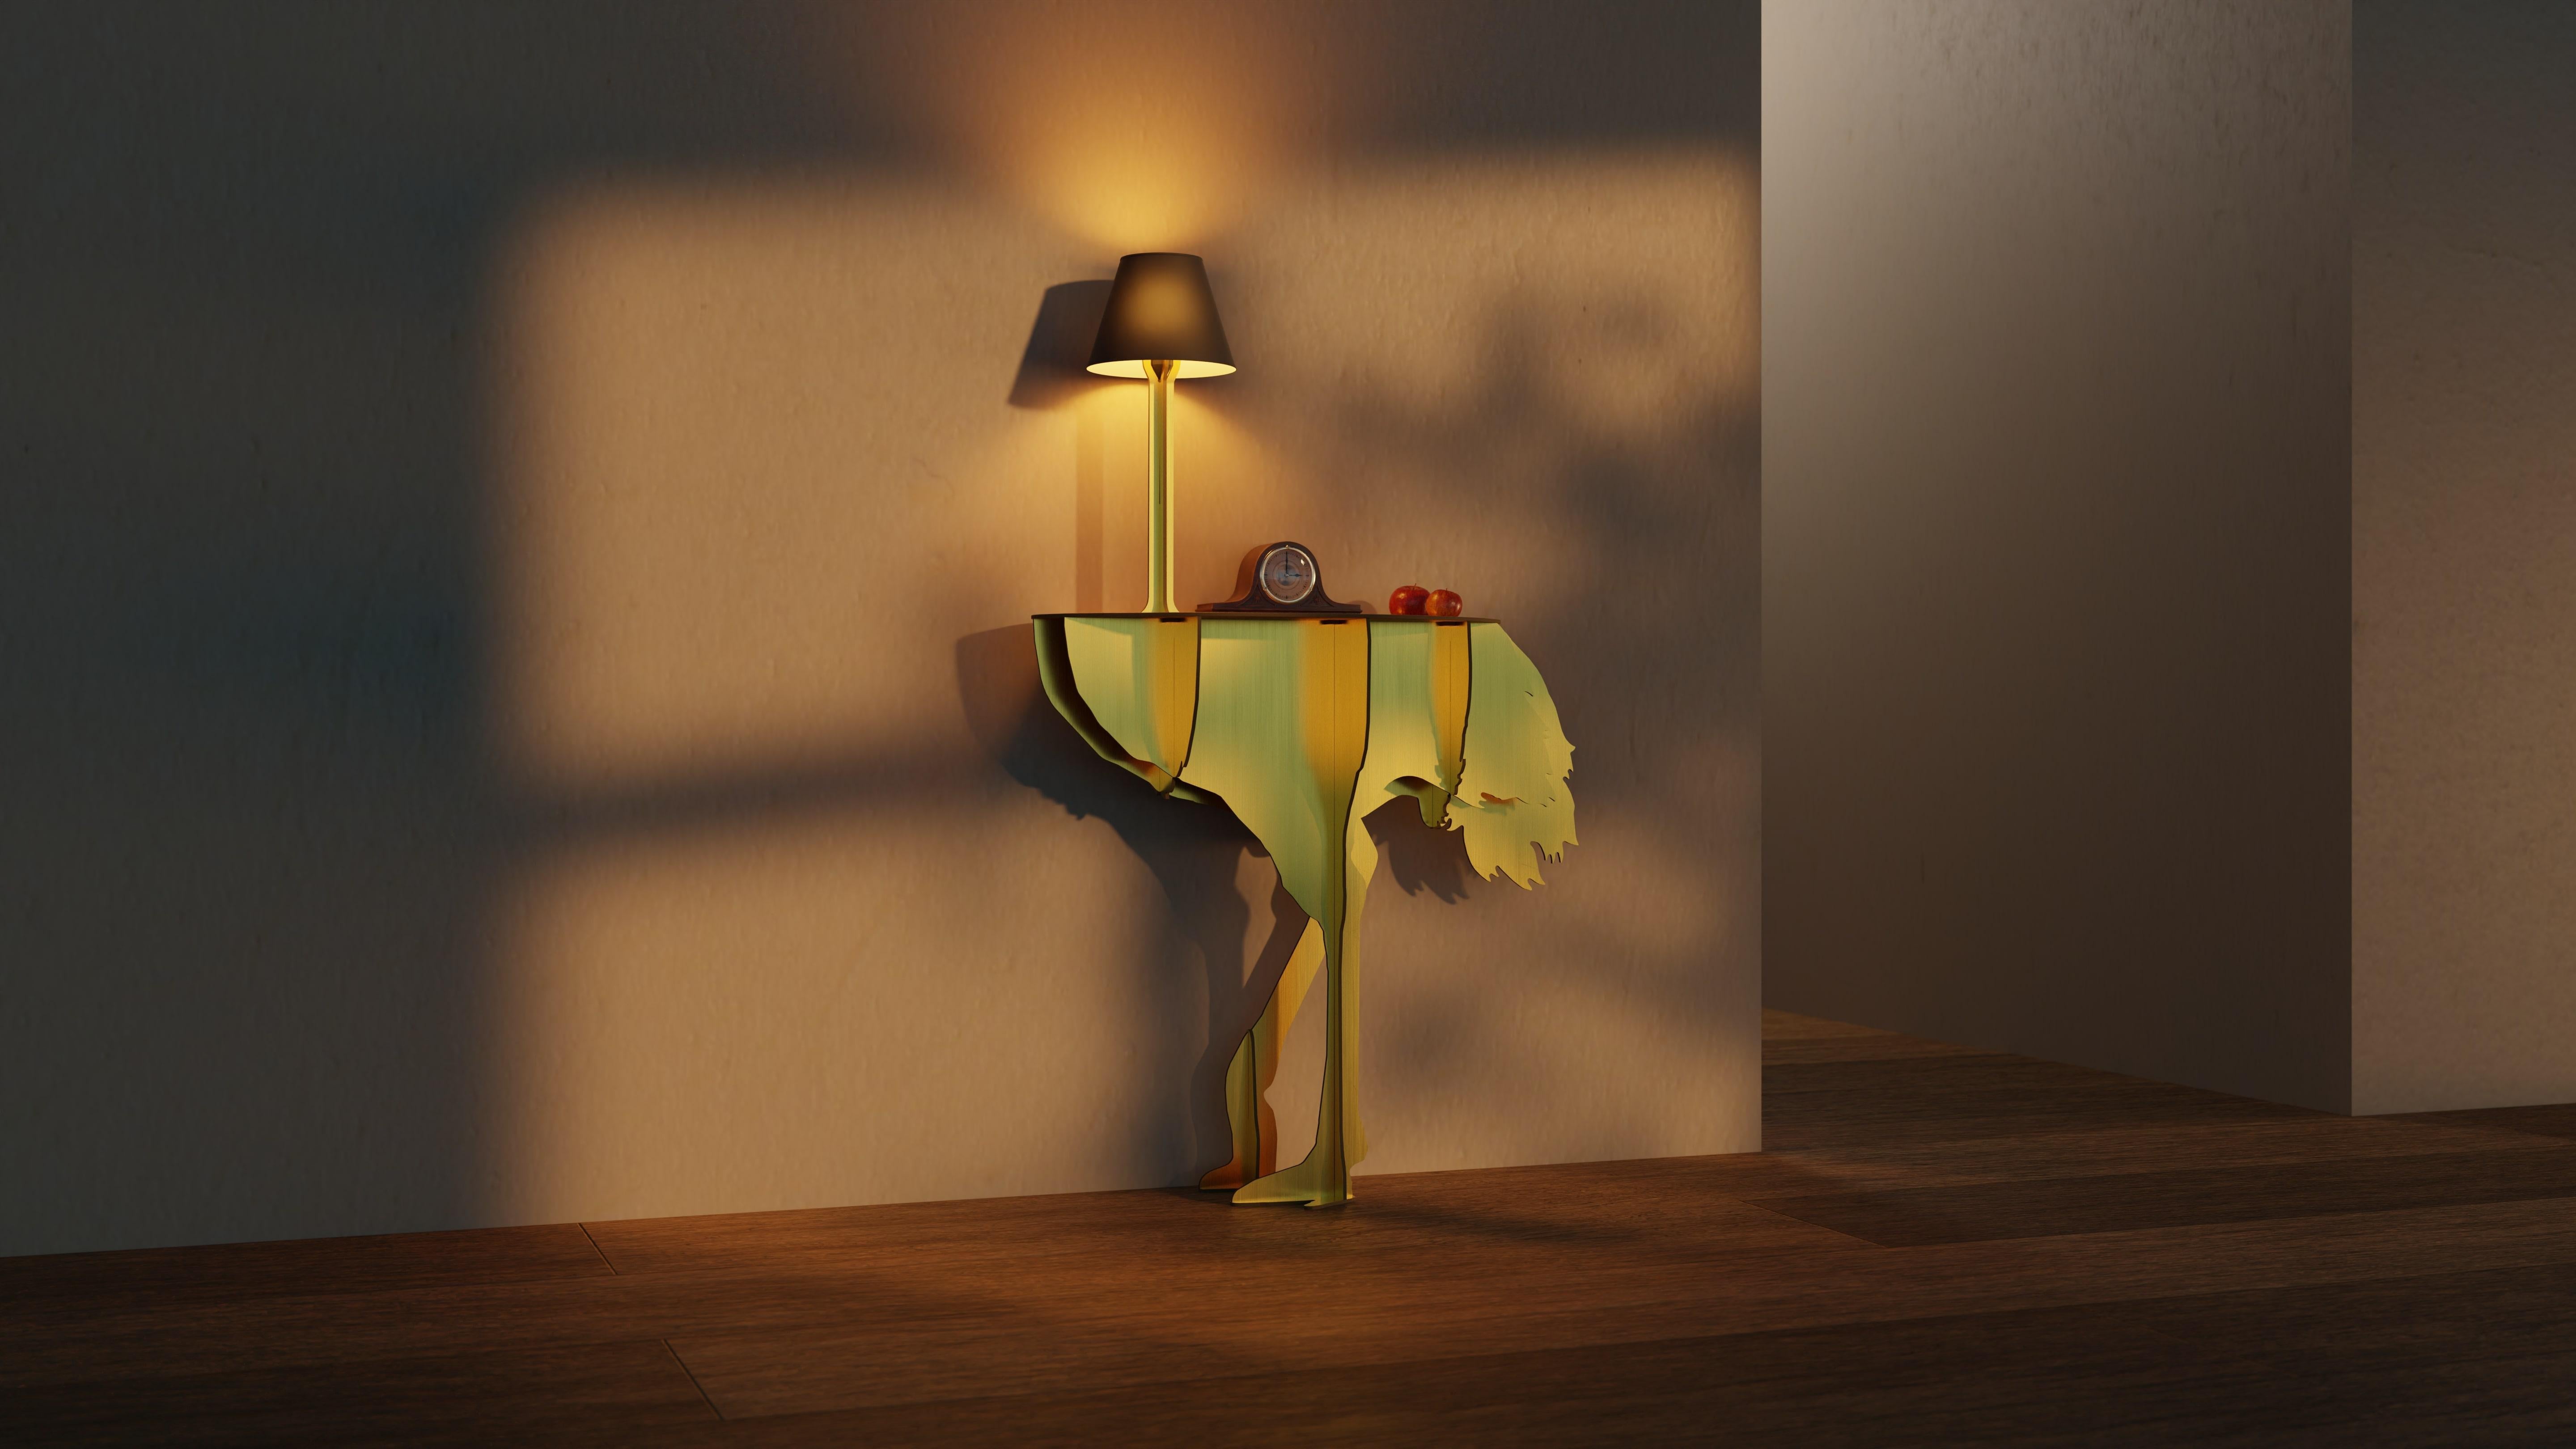 Graceful and airy, the ostrich Diva Lucia seems ready to take off in a wild race, defying gravity with its two feet barely anchored to the ground.
Designed to lean against the wall and equipped with a lamp, this illuminated, ornamental, and